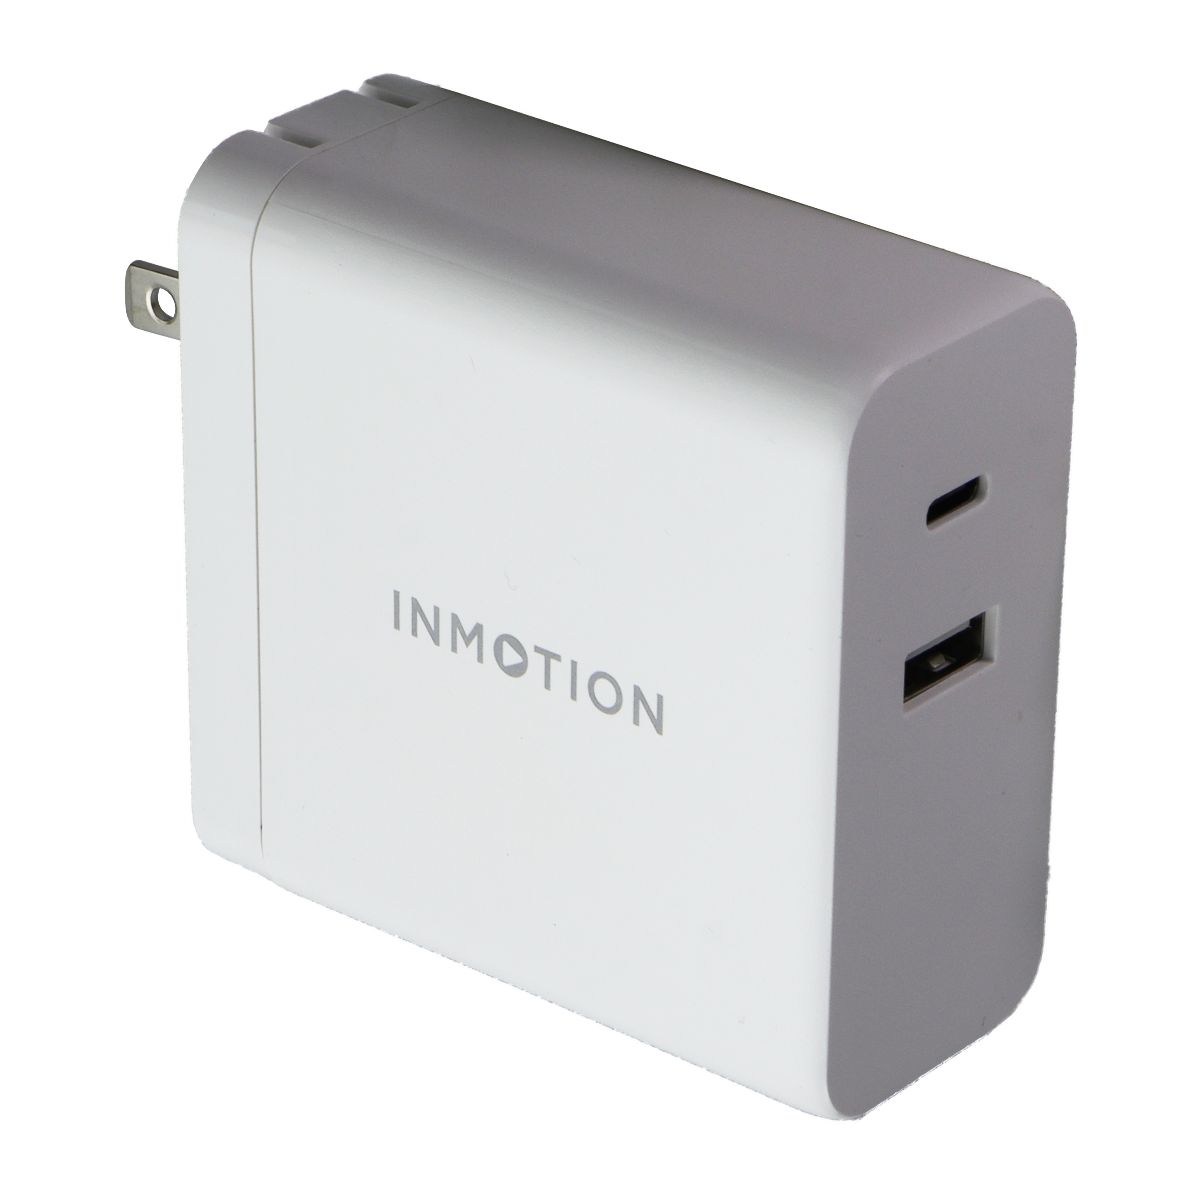 InMotion (65W) USB-C Power Adapter & 3m USB-C Cable for Laptops/Notebooks & More